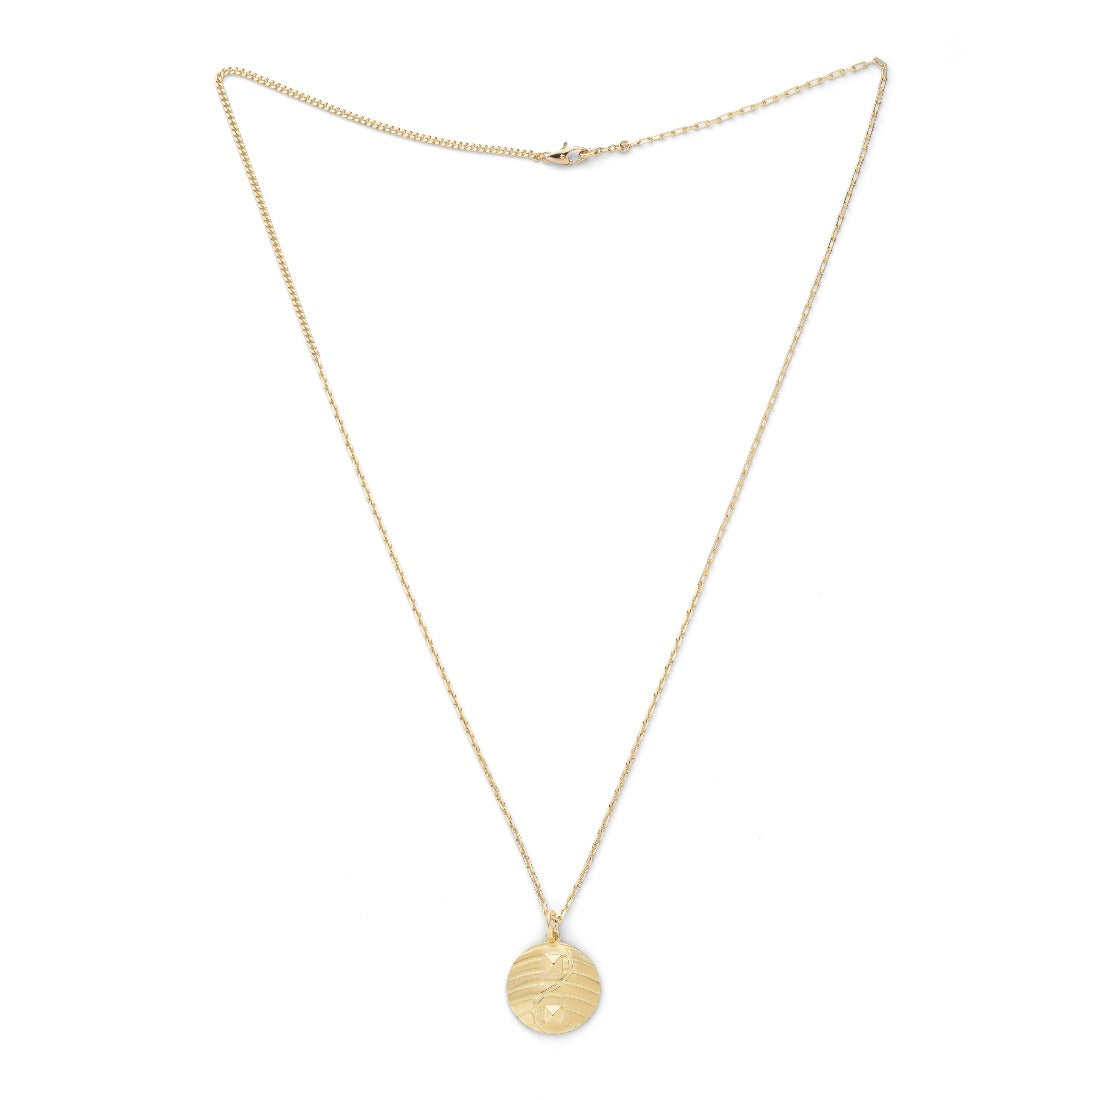 18K　コイン　ネックレス　Coin Necklace　ラージサイズ